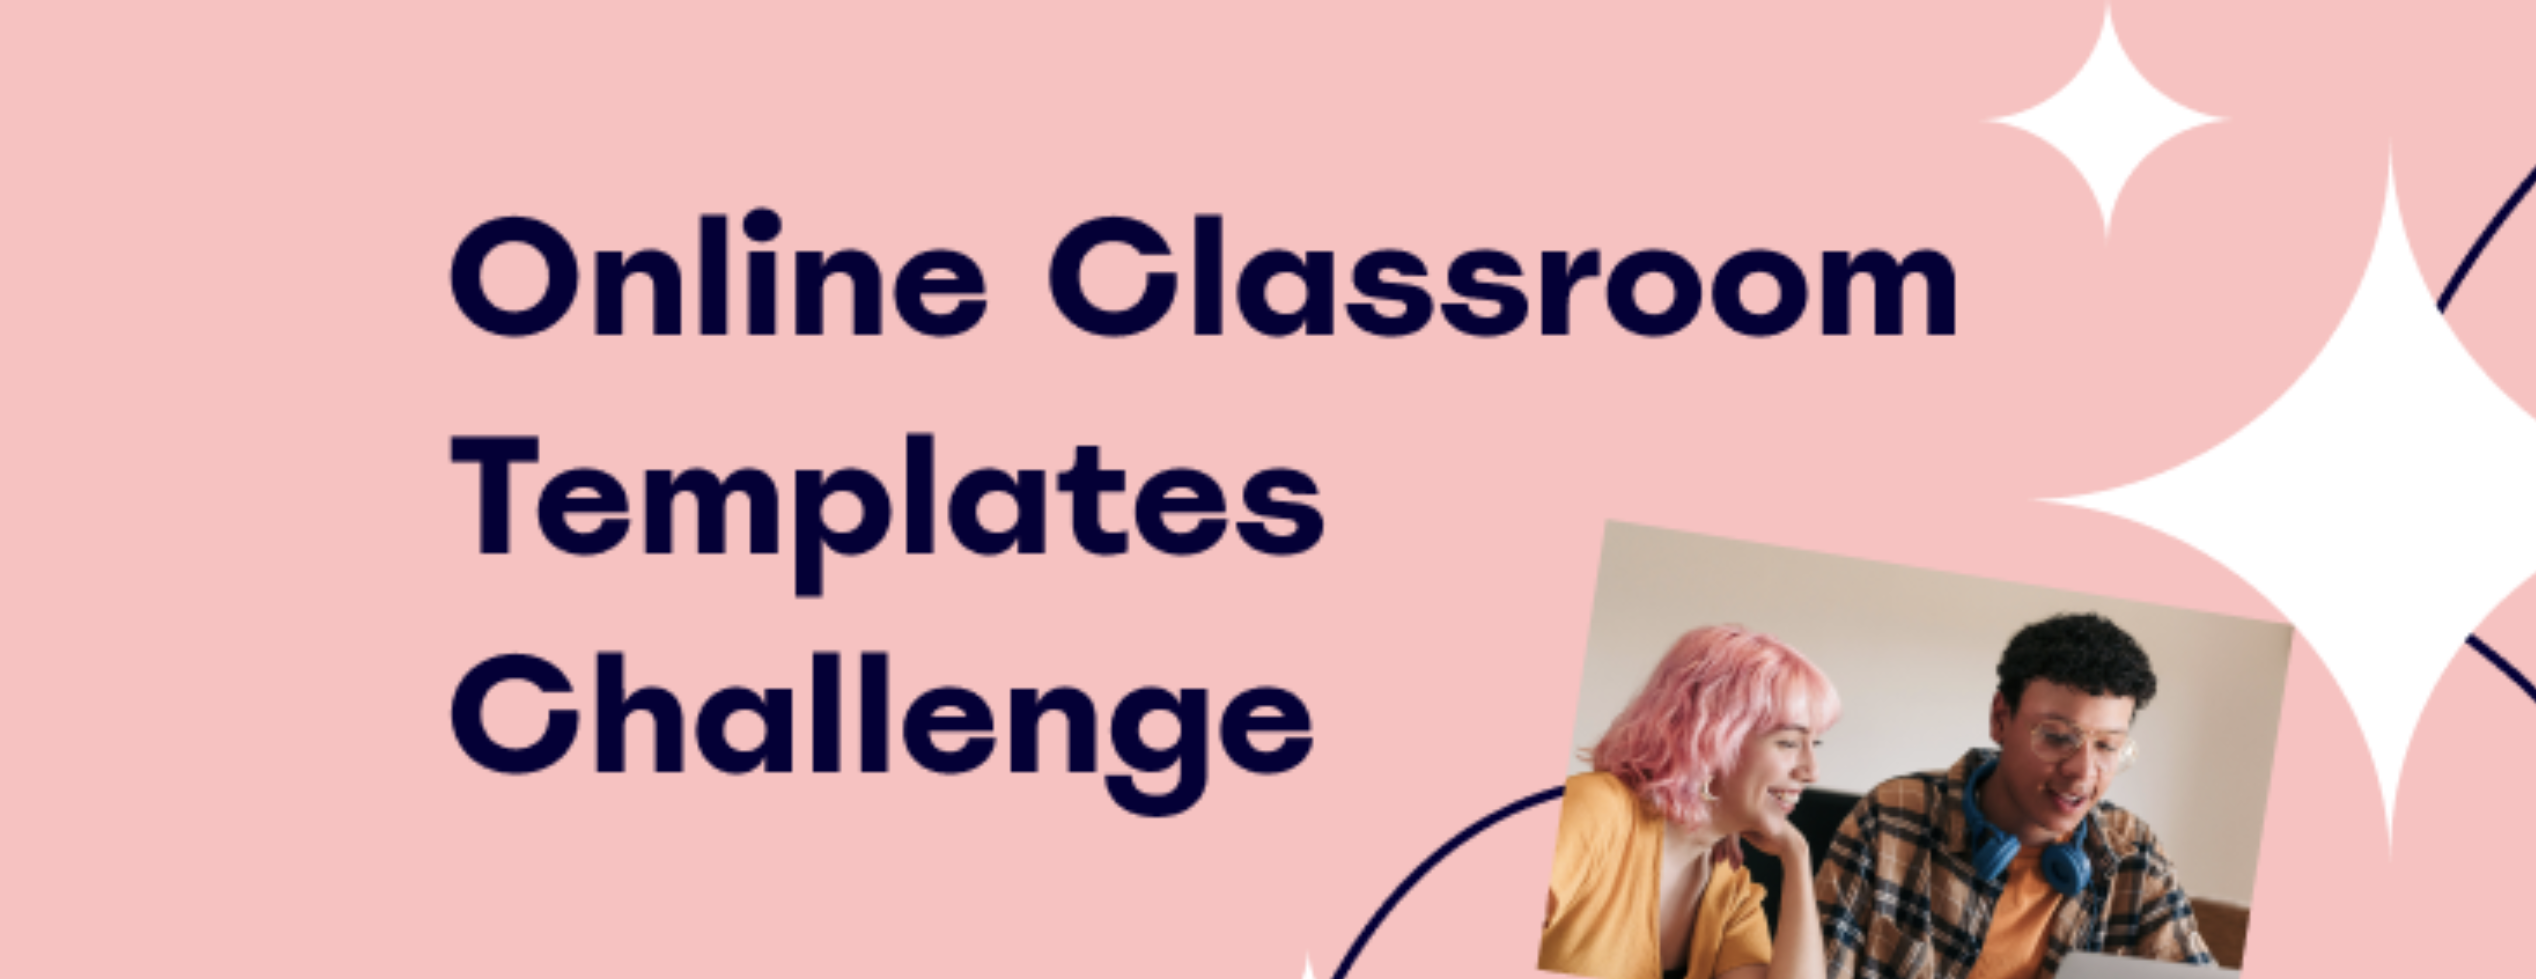 Win an iPad Pro: share how you Miro in the online classroom templates challenge 🧑‍🏫